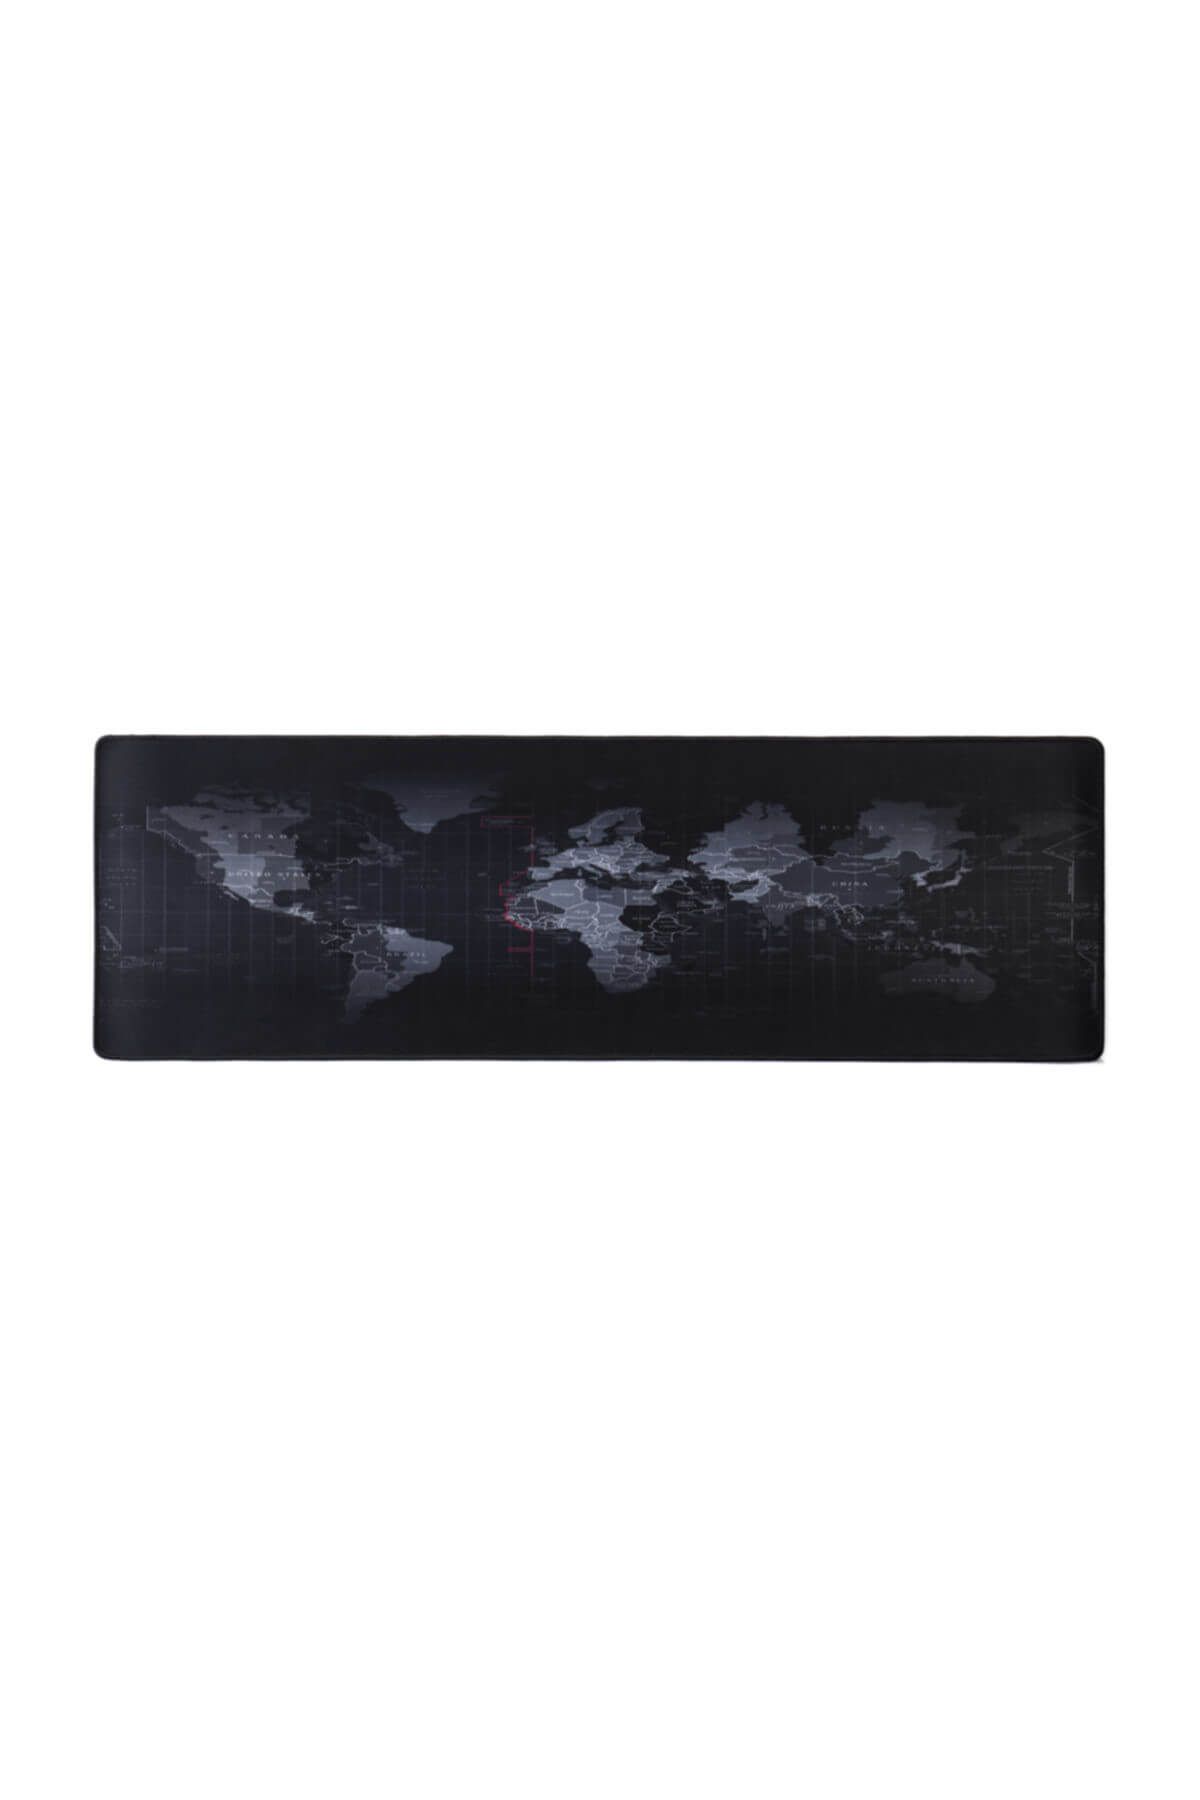 Hiper Hgm-900 World Map Mouse Pad 900 x 300 x 4Mm